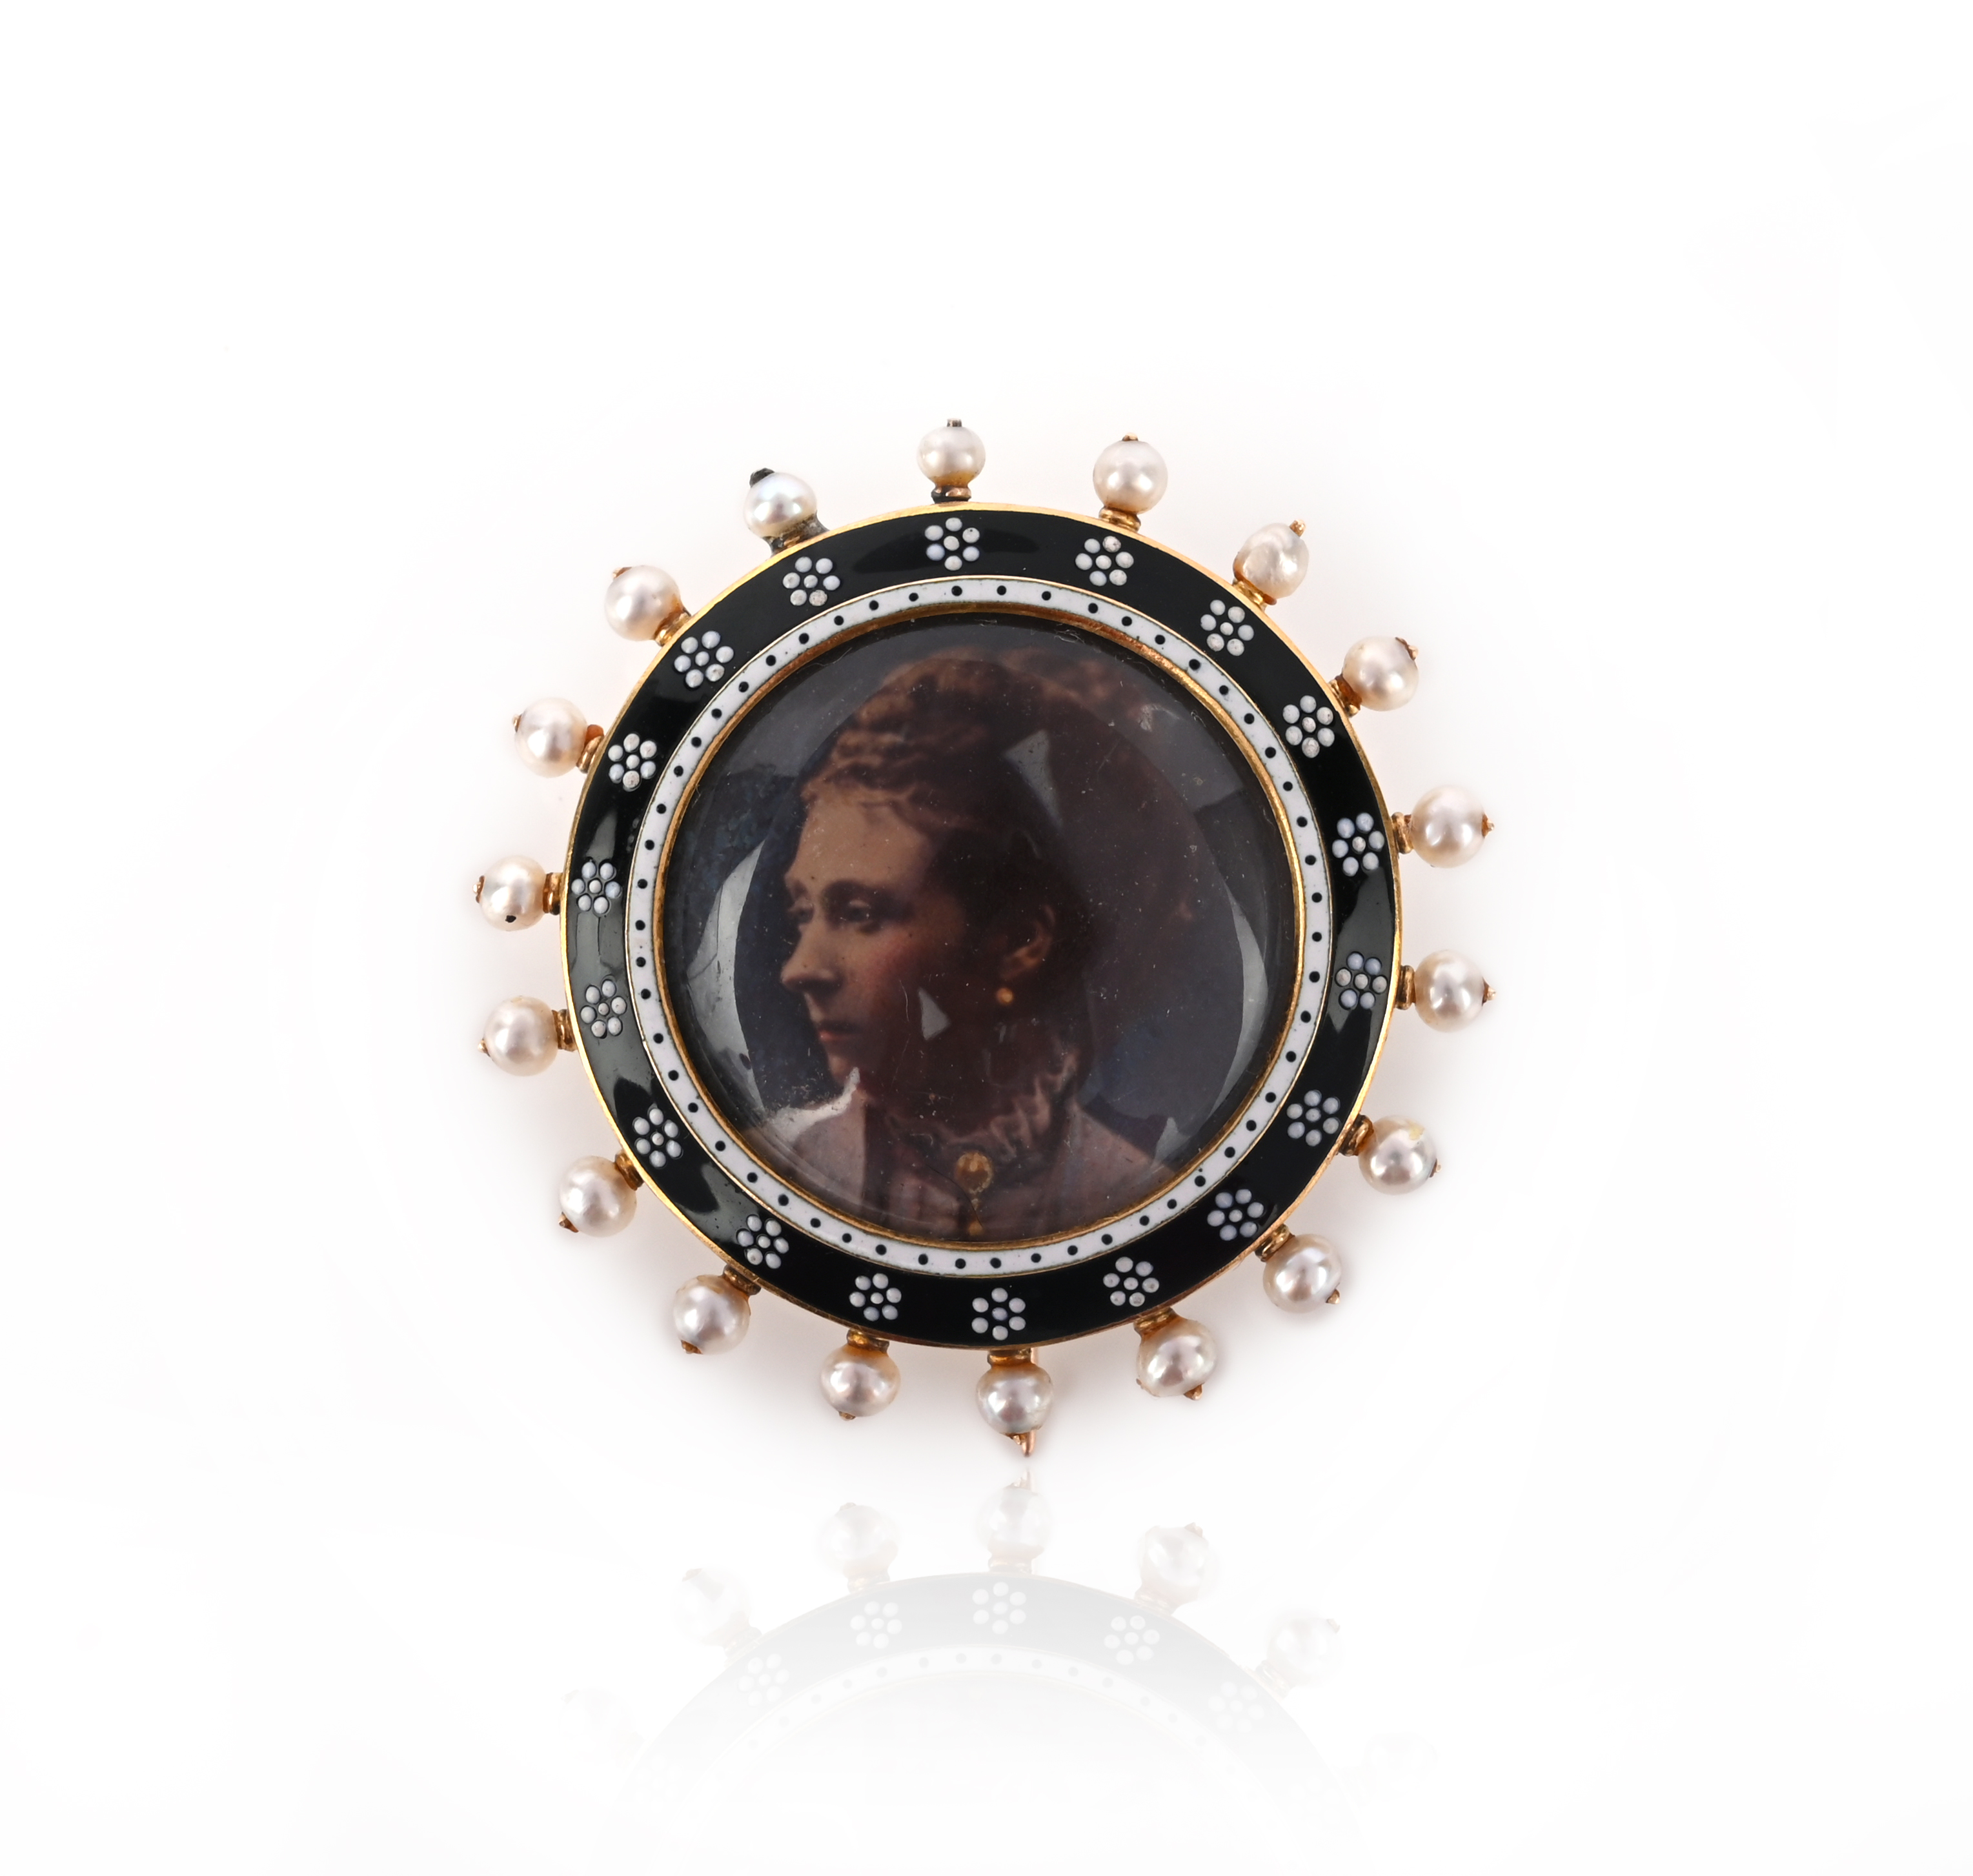 Attributed to Carlo Giuliano, an important Royal enamel and pearl mourning brooch, 1880s, of